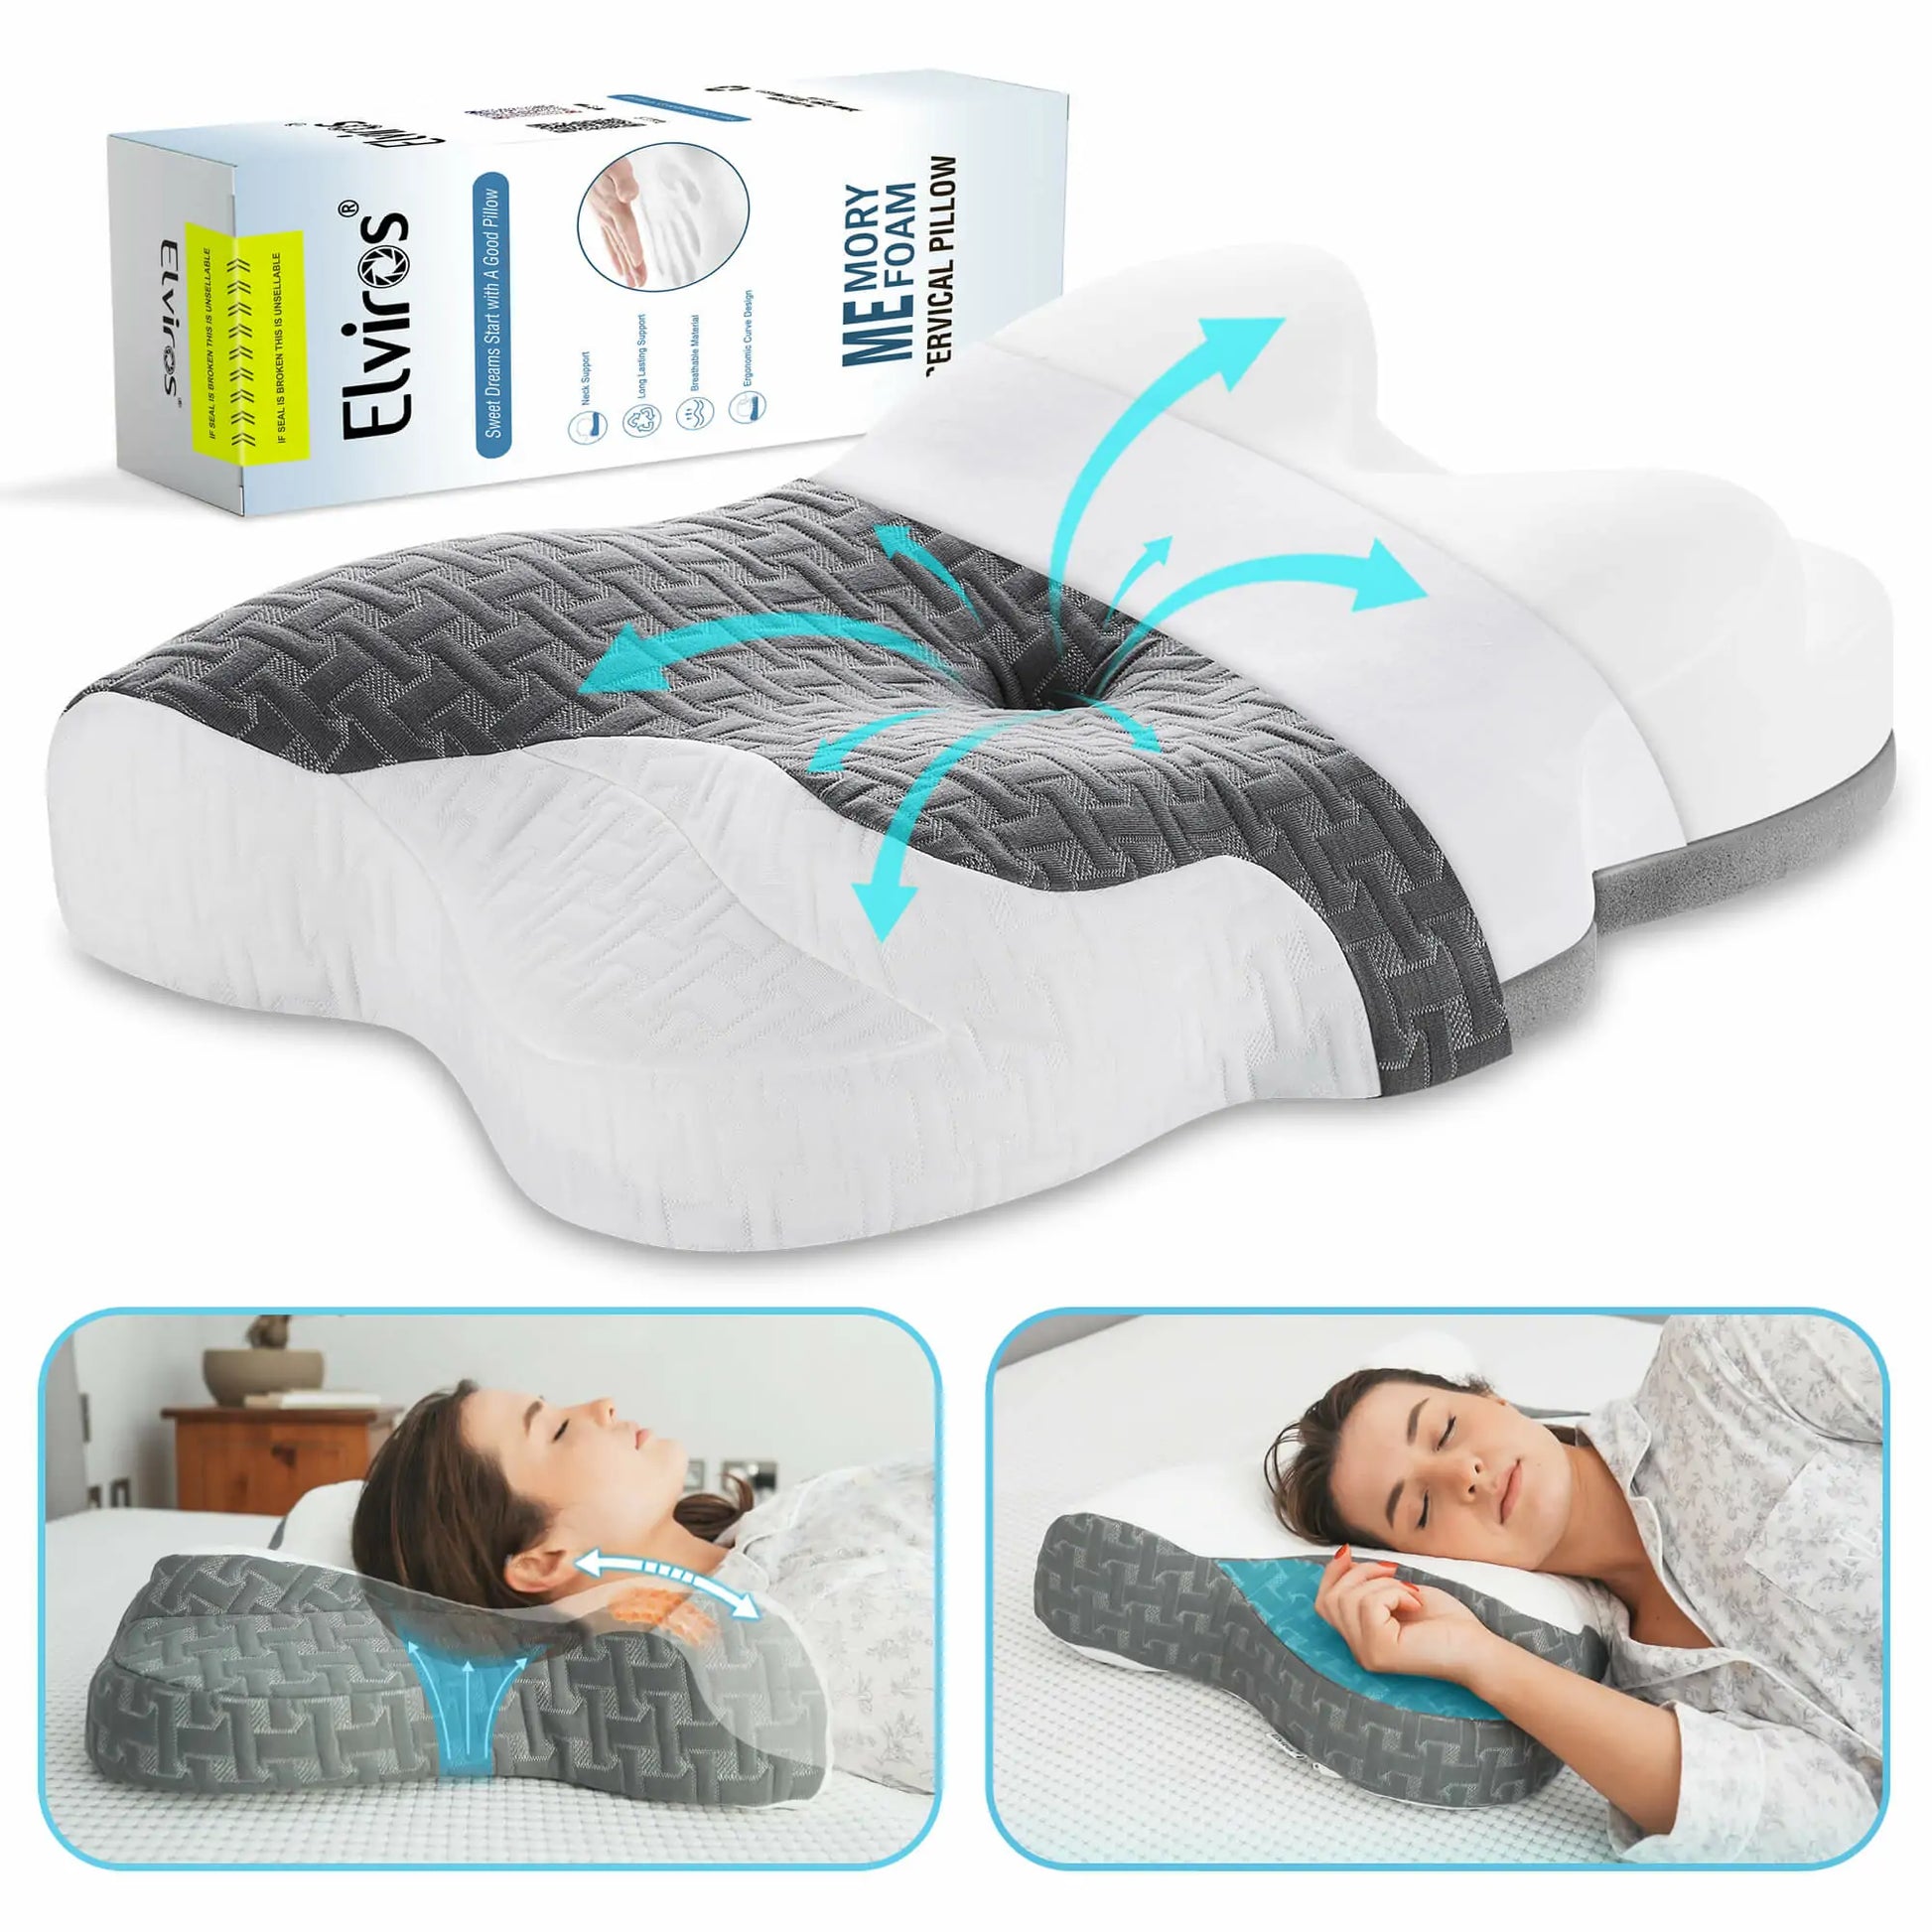 Elviros Cervical Memory Foam Pillow for Pain Relief Gray / Queen Size 23.6Lx16Wx(4.1-4.10)H